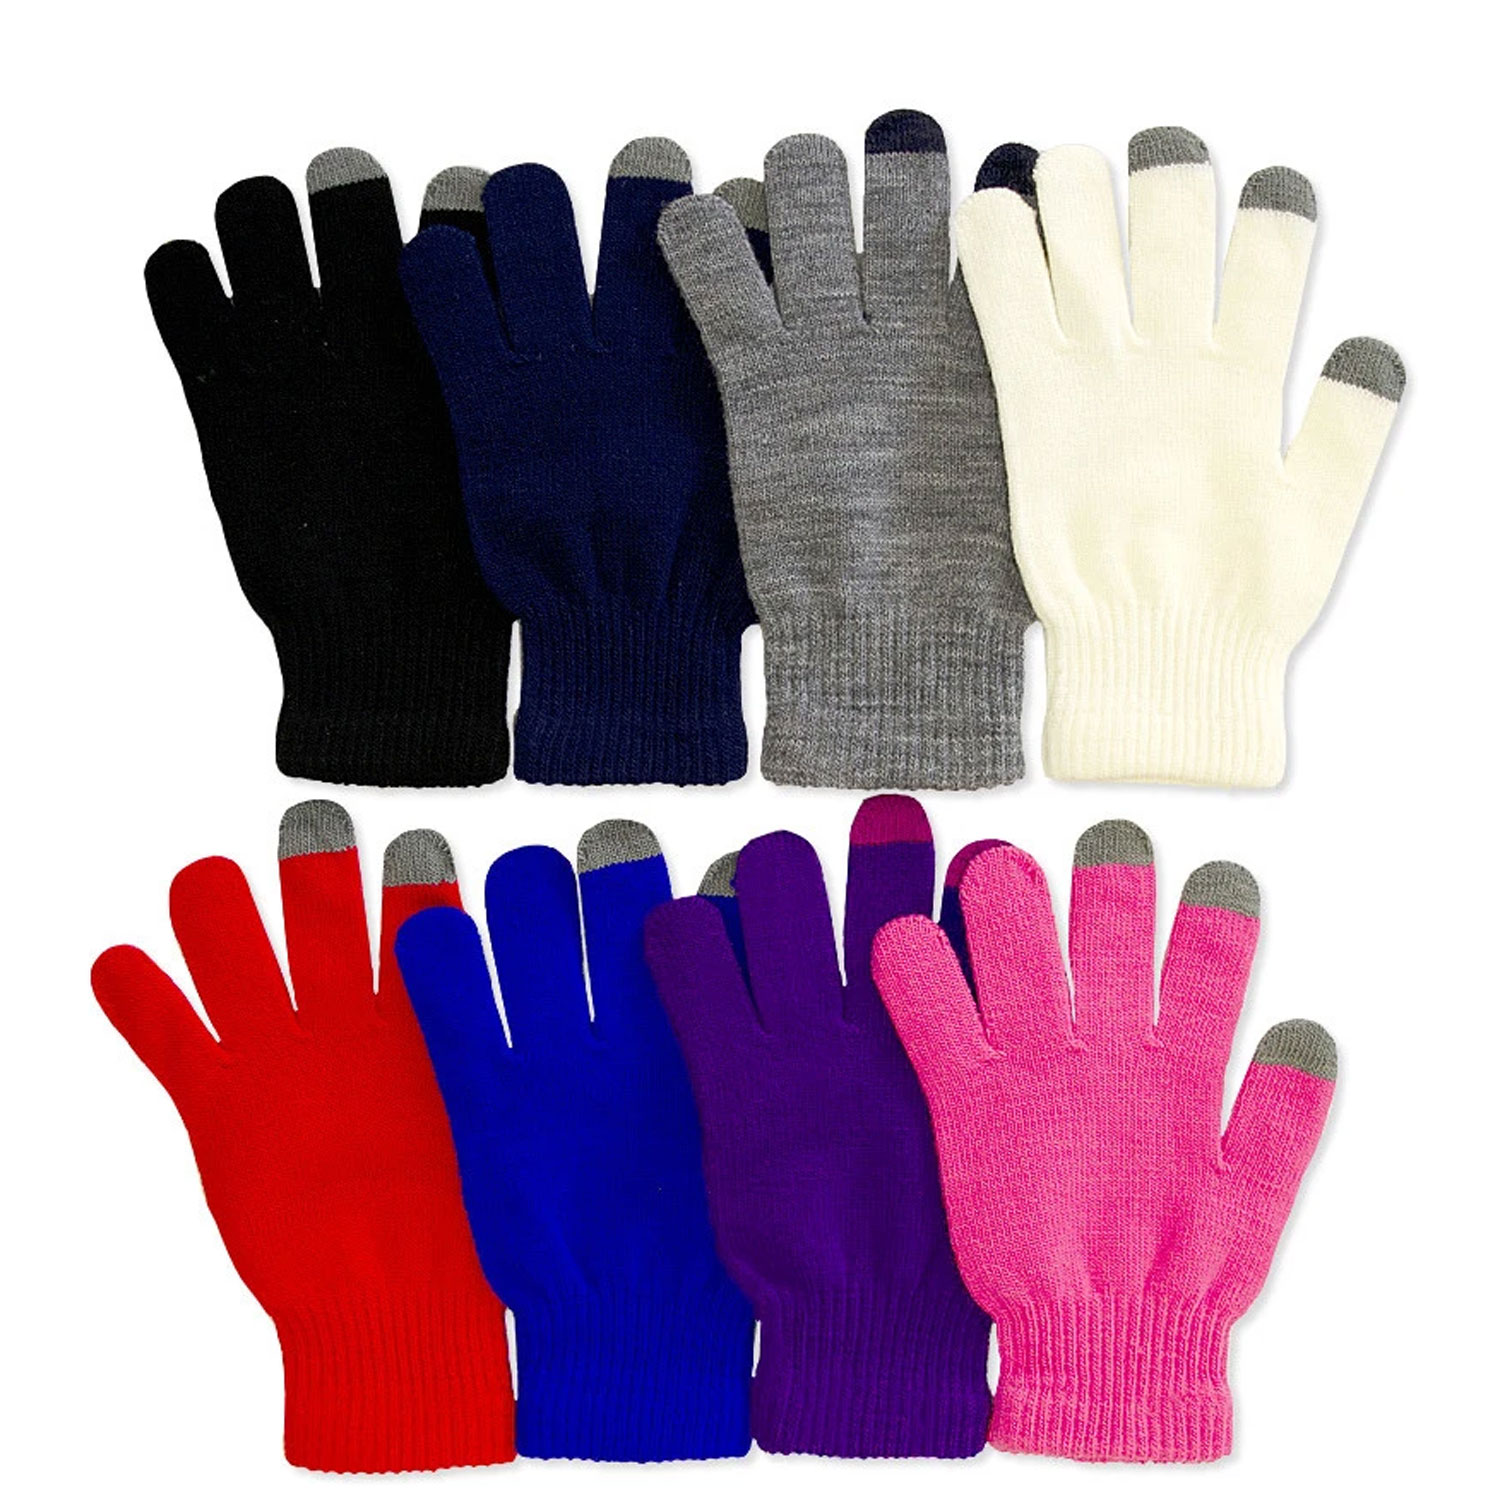 8 Pairs Ladies Touch Screen Magic Gloves